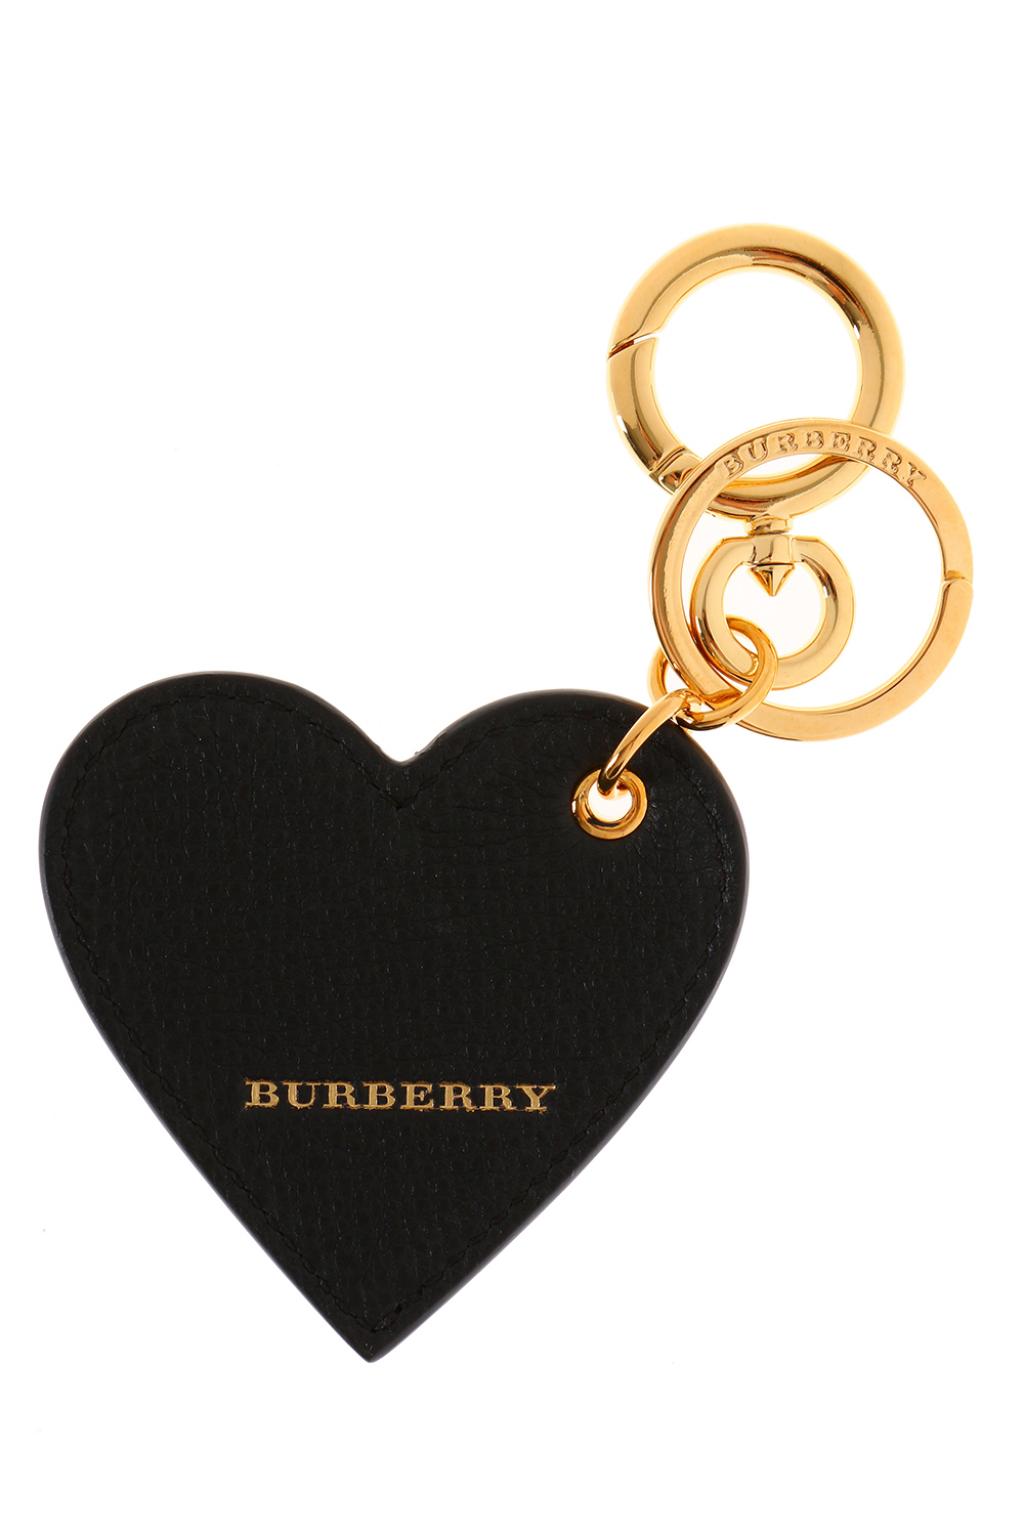 Burberry, Accessories, Burberry Patent Leather Heart Keychain